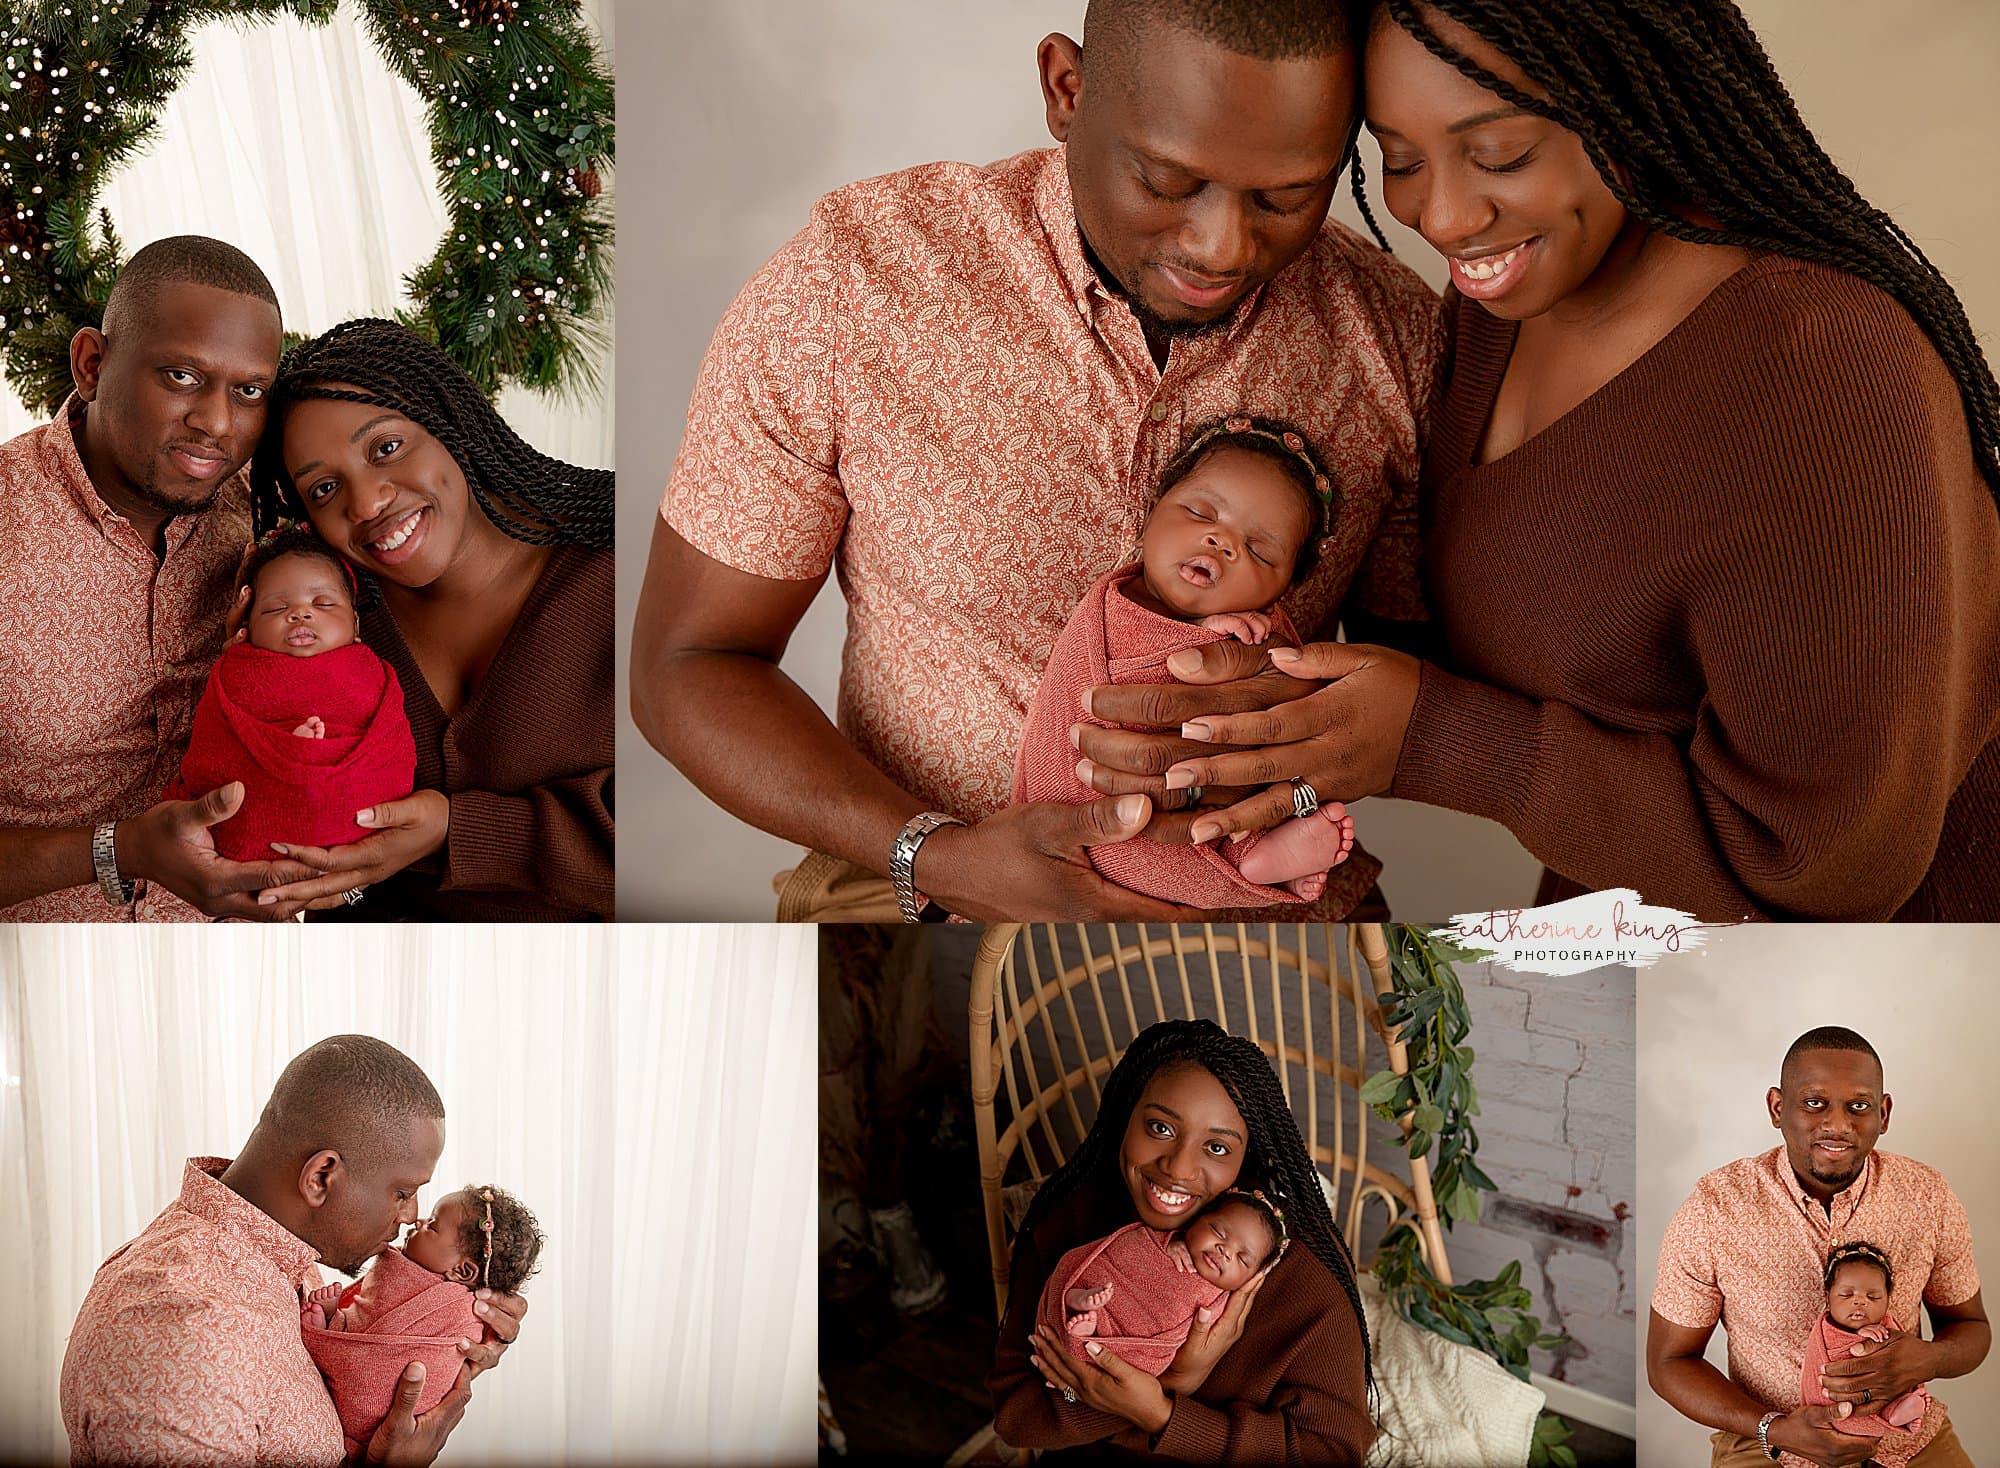 Newborn Photography feature with miss Aniah, Manchester CT